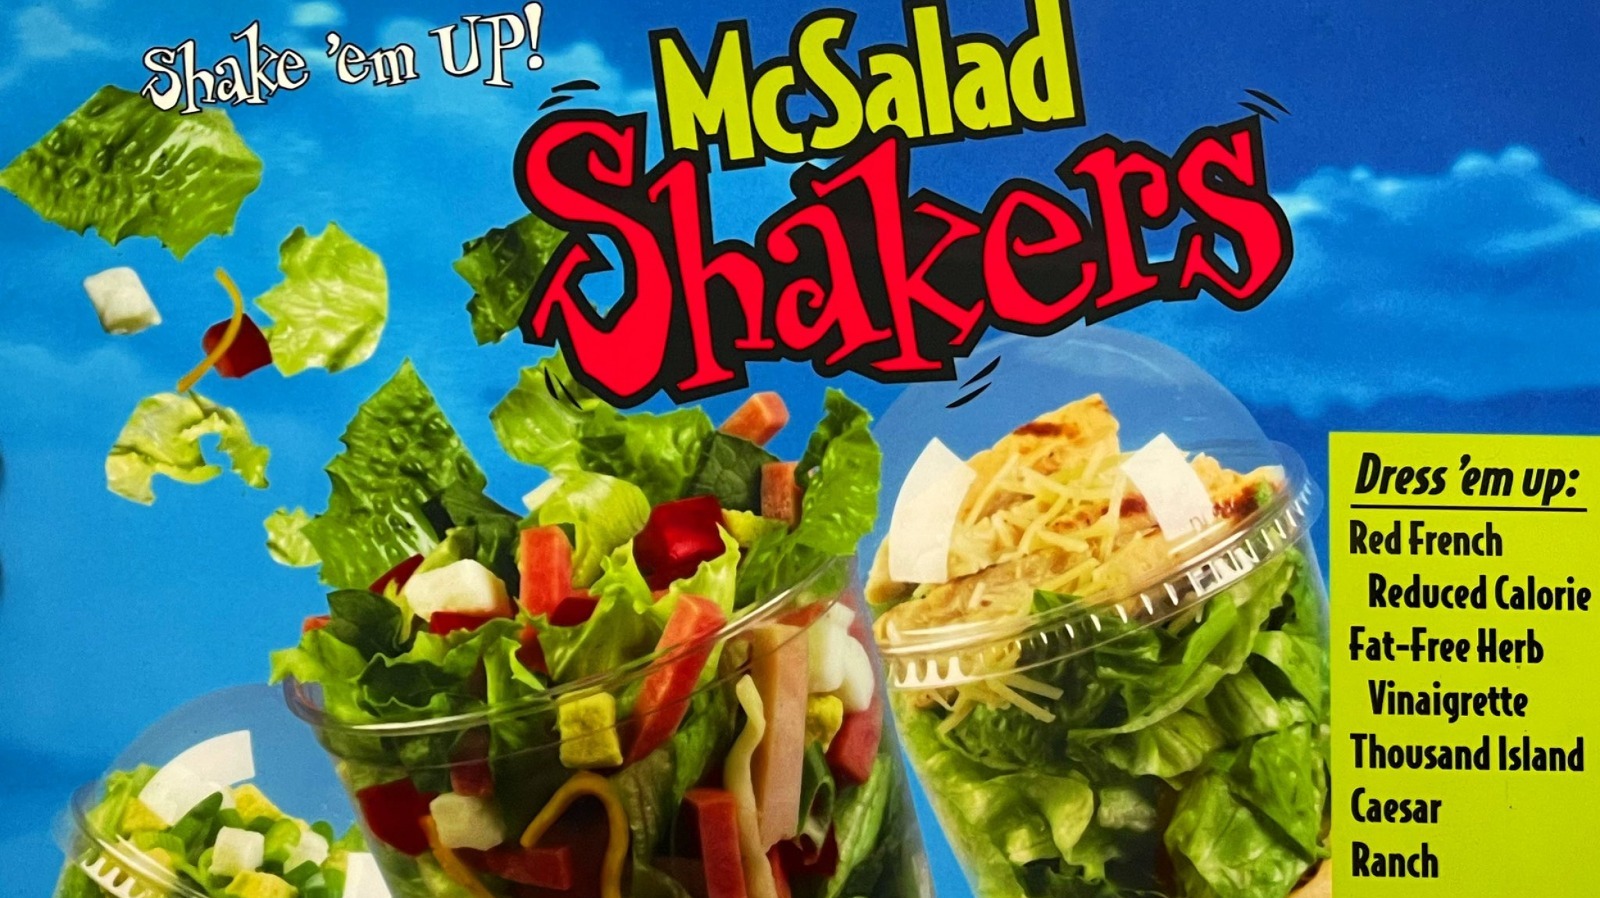 https://www.thedailymeal.com/img/gallery/what-happened-to-mcdonalds-fan-favorite-mcsalad-shakers/l-intro-1688588894.jpg